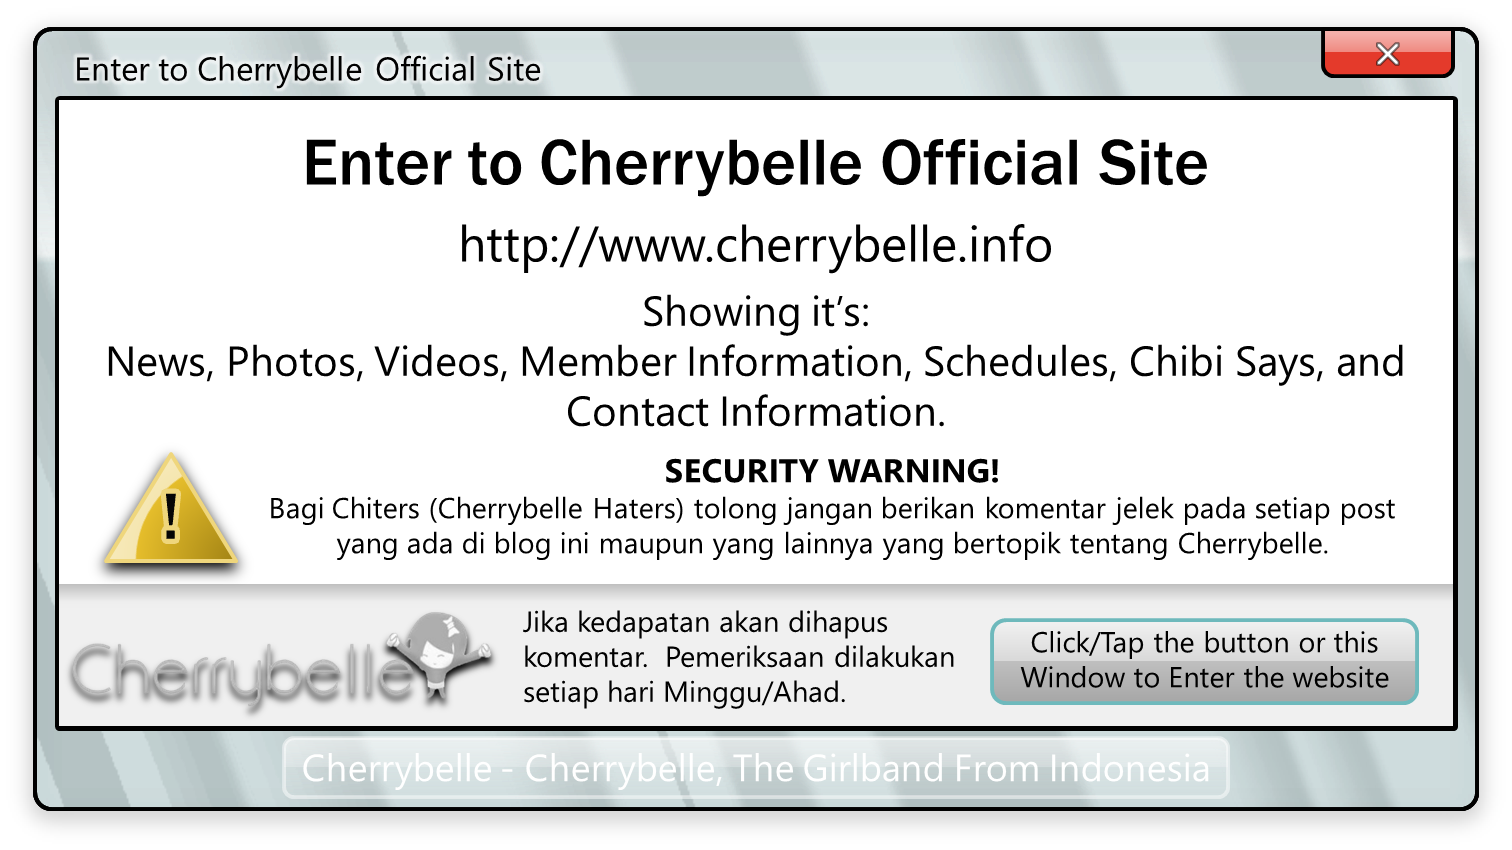 ENTER TO CHERRYBELLE OFFICIAL SITE